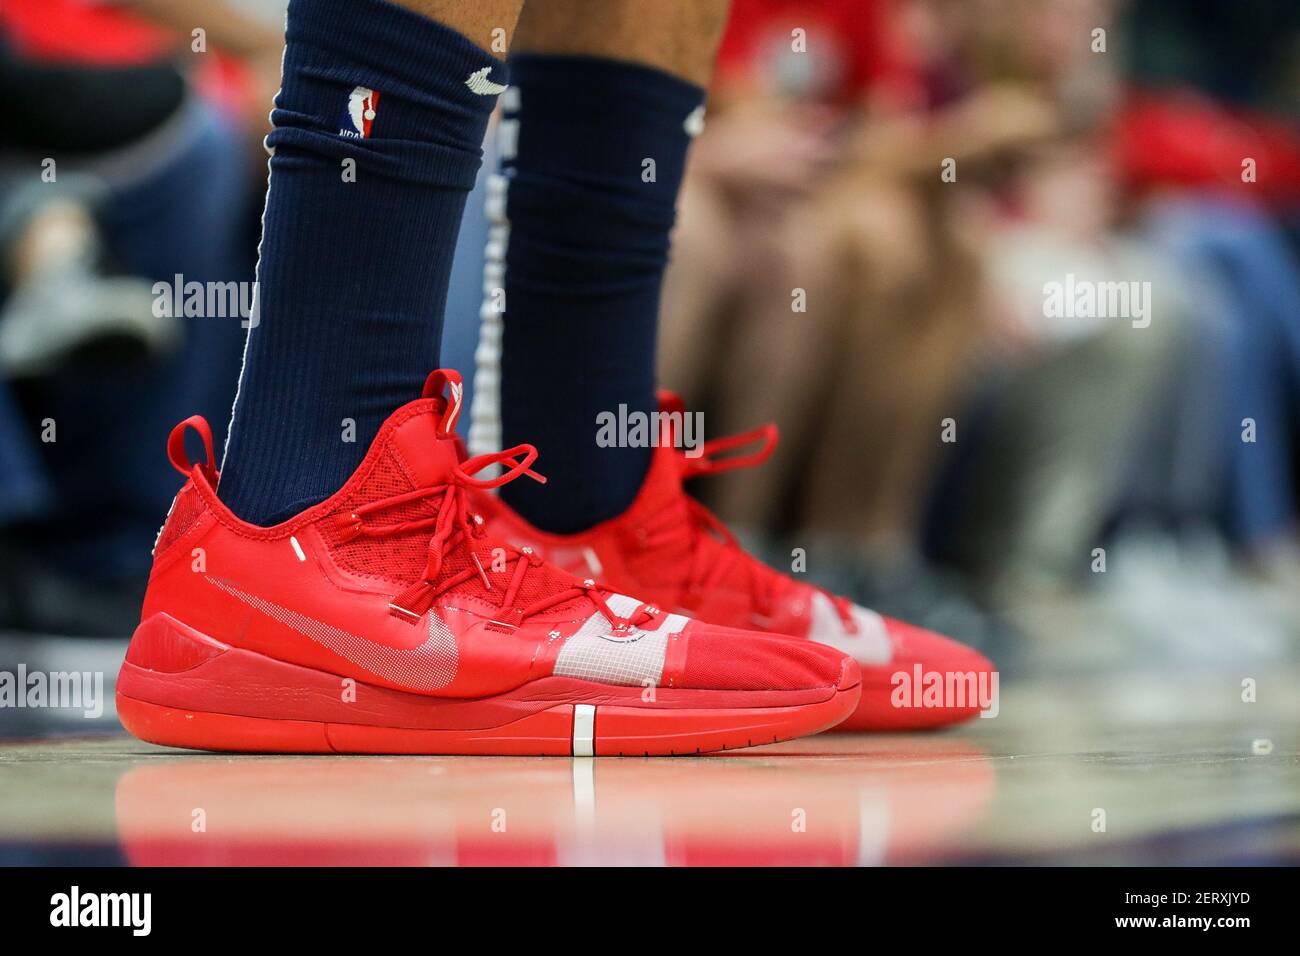 sej klipning benzin Oct 26, 2018; New Orleans, LA, USA; A detail of shoes worn by New Orleans  Pelicans forward Anthony Davis (23) during warmups before the game against  the Brooklyn Nets at Smoothie King